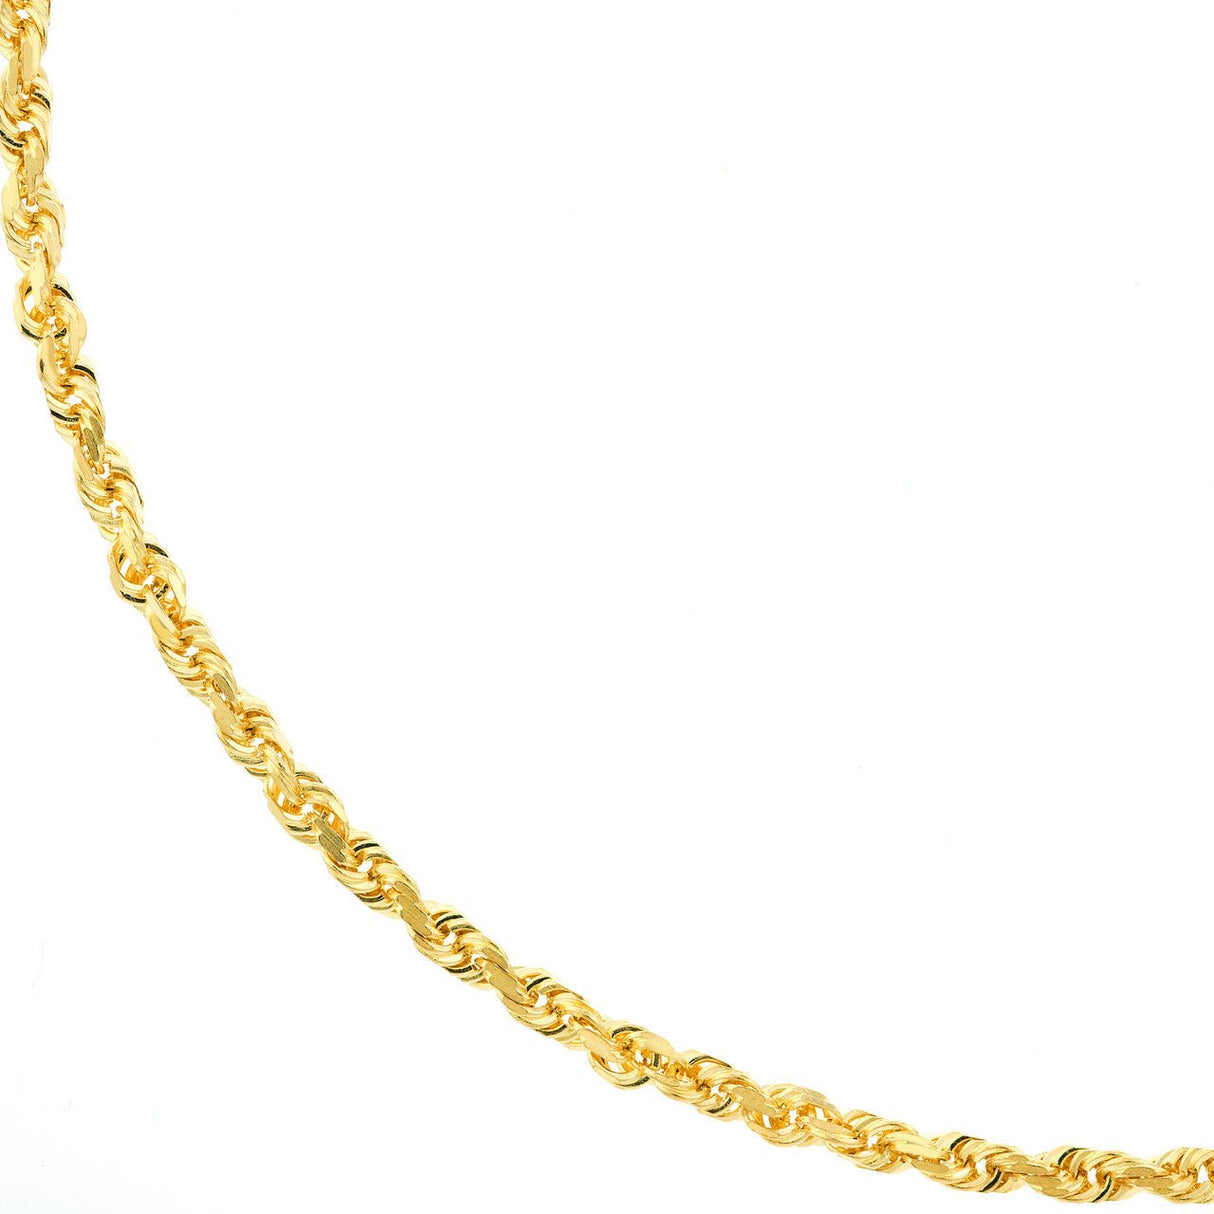 14K Gold Chain, 20", 3mm D/C Rope Chain with Lobster Lock, Gold Layered Chain, Gold Layered Necklaces, 2023 - Diamond Origin